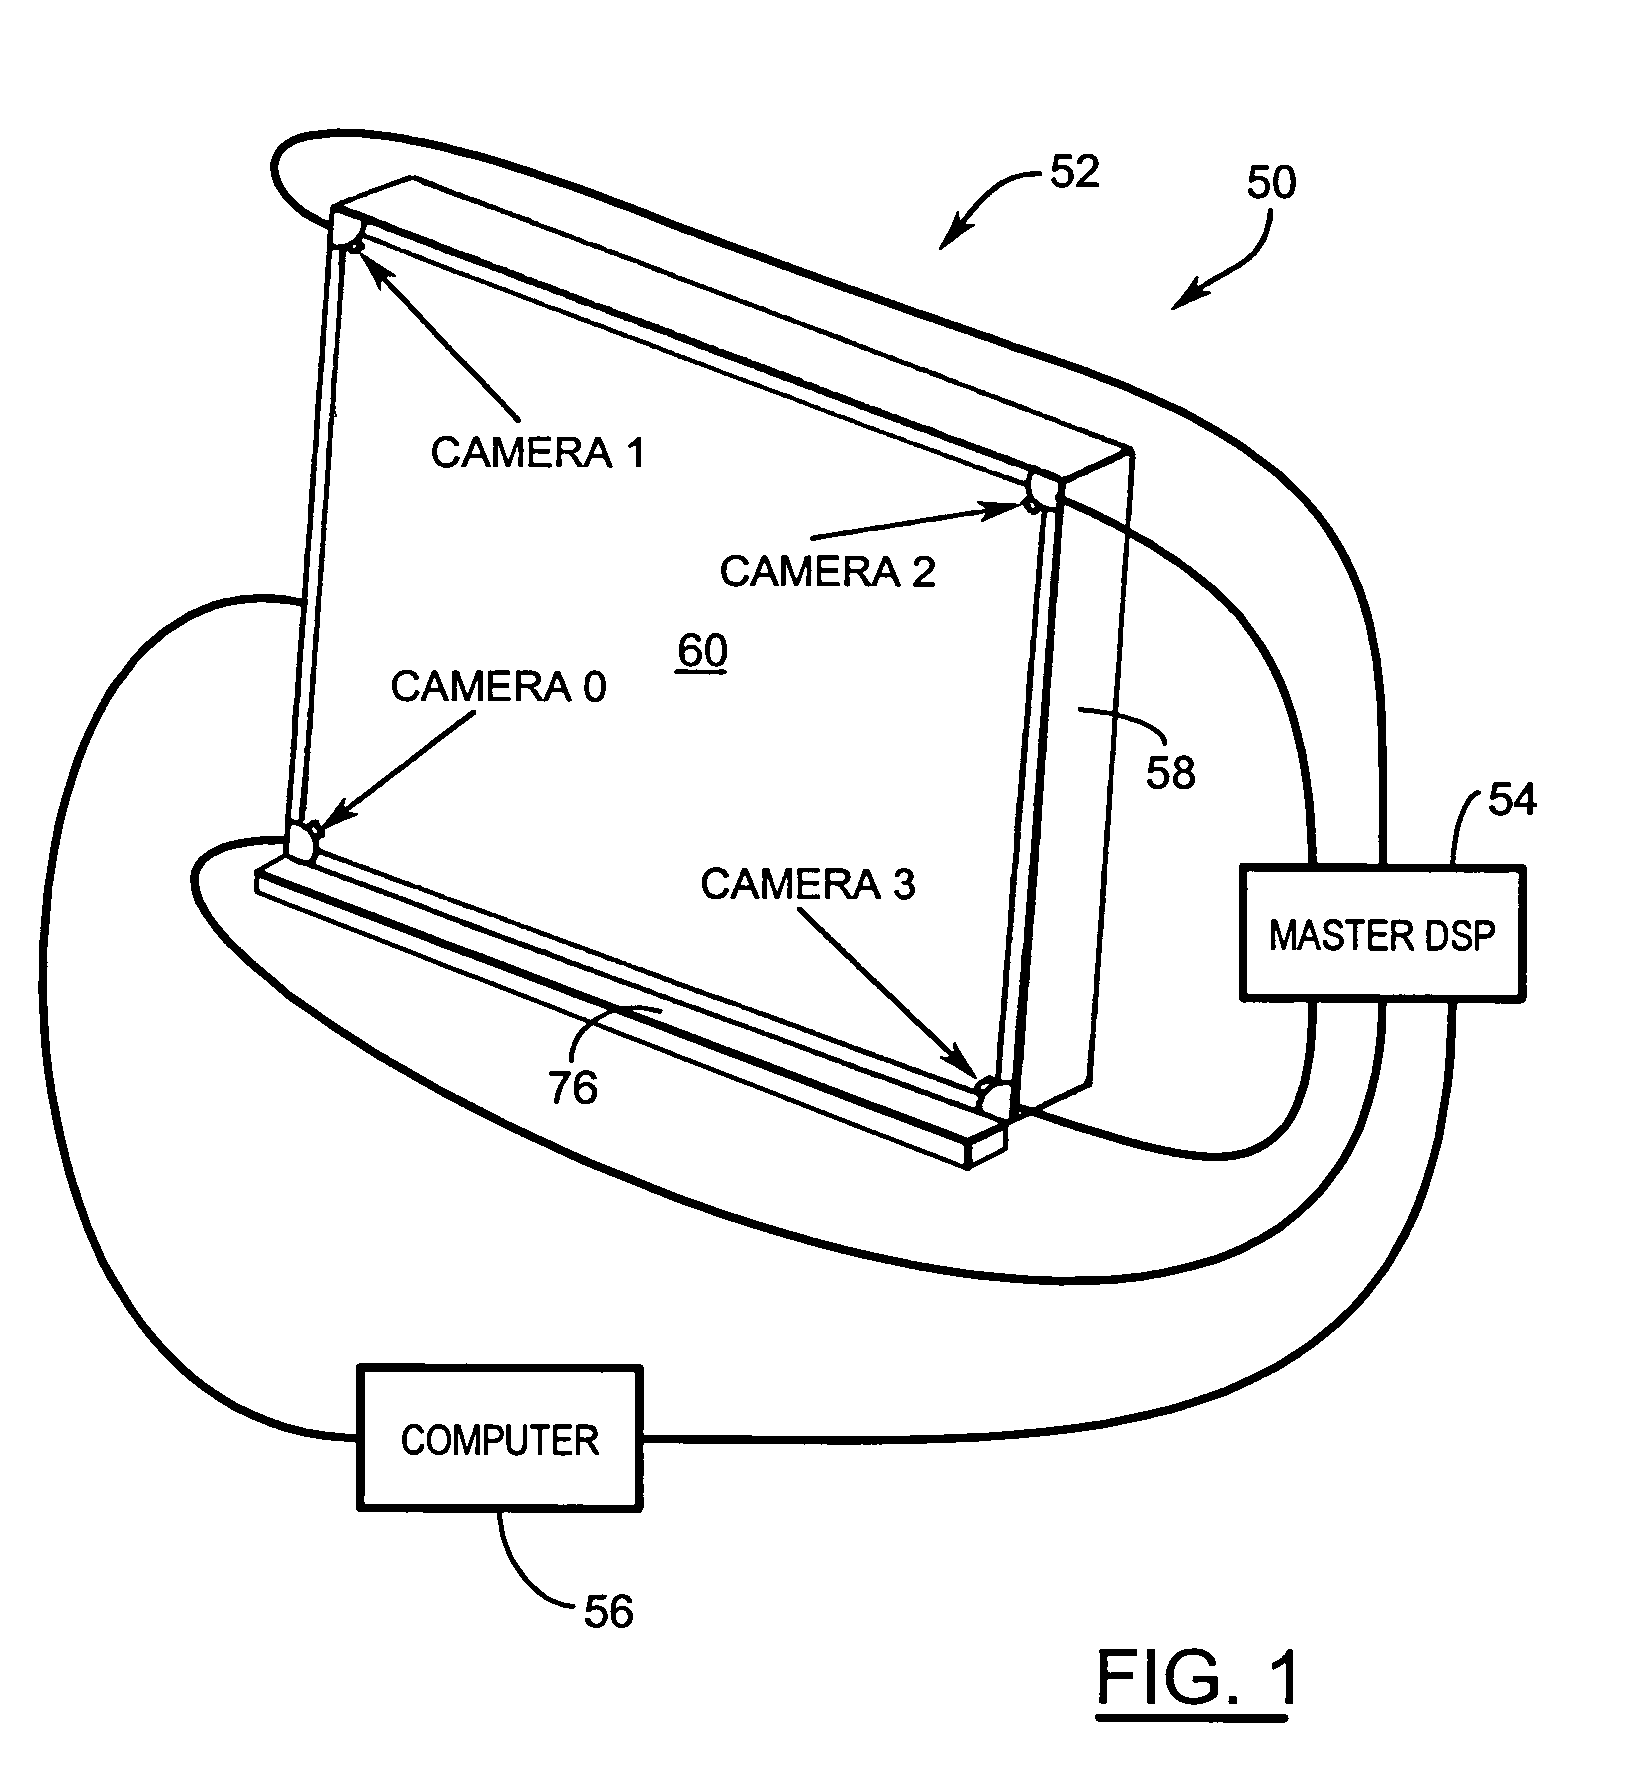 System and method for differentiating between pointers used to contact touch surface